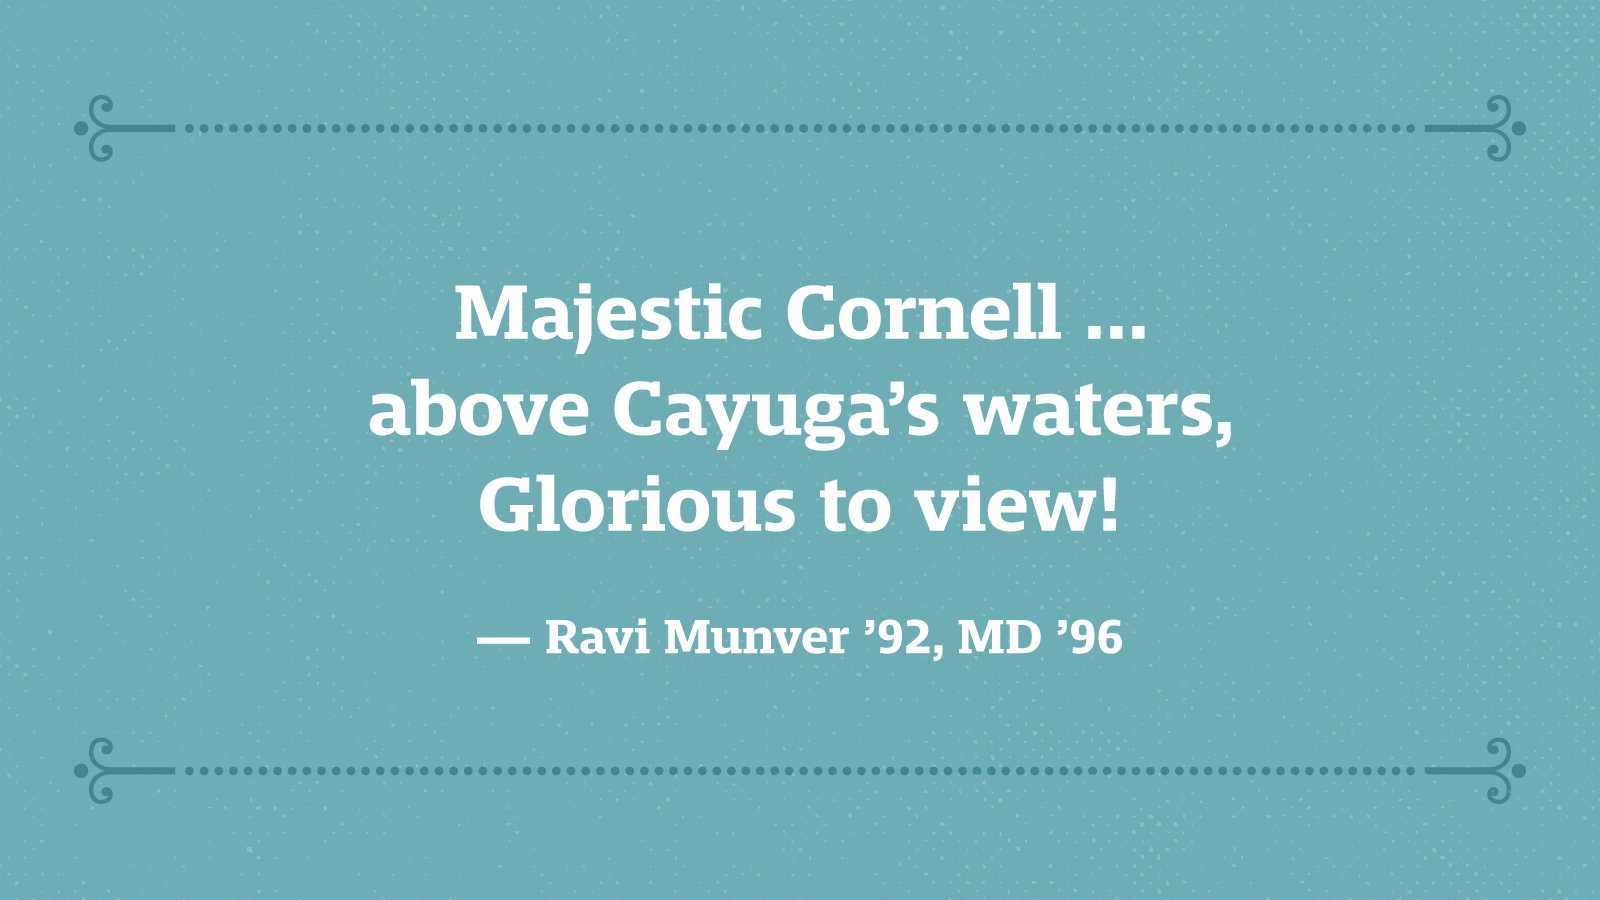 Majestic Cornell … above Cayuga’s waters, Glorious to view! — Ravi Munver ’92, MD ’96